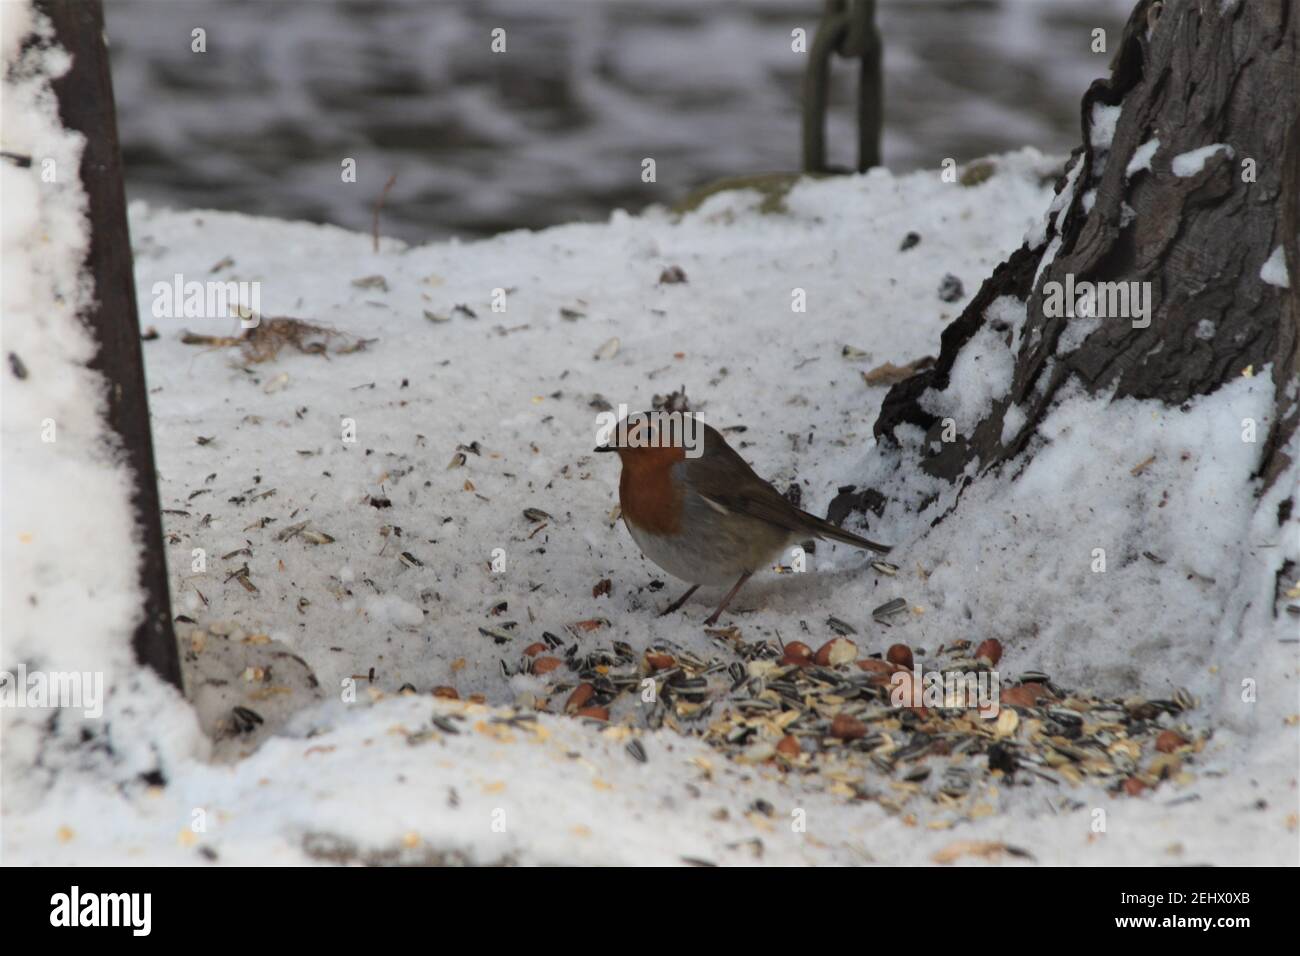 A little robin sits on a snow-covered ground searching for food Stock Photo